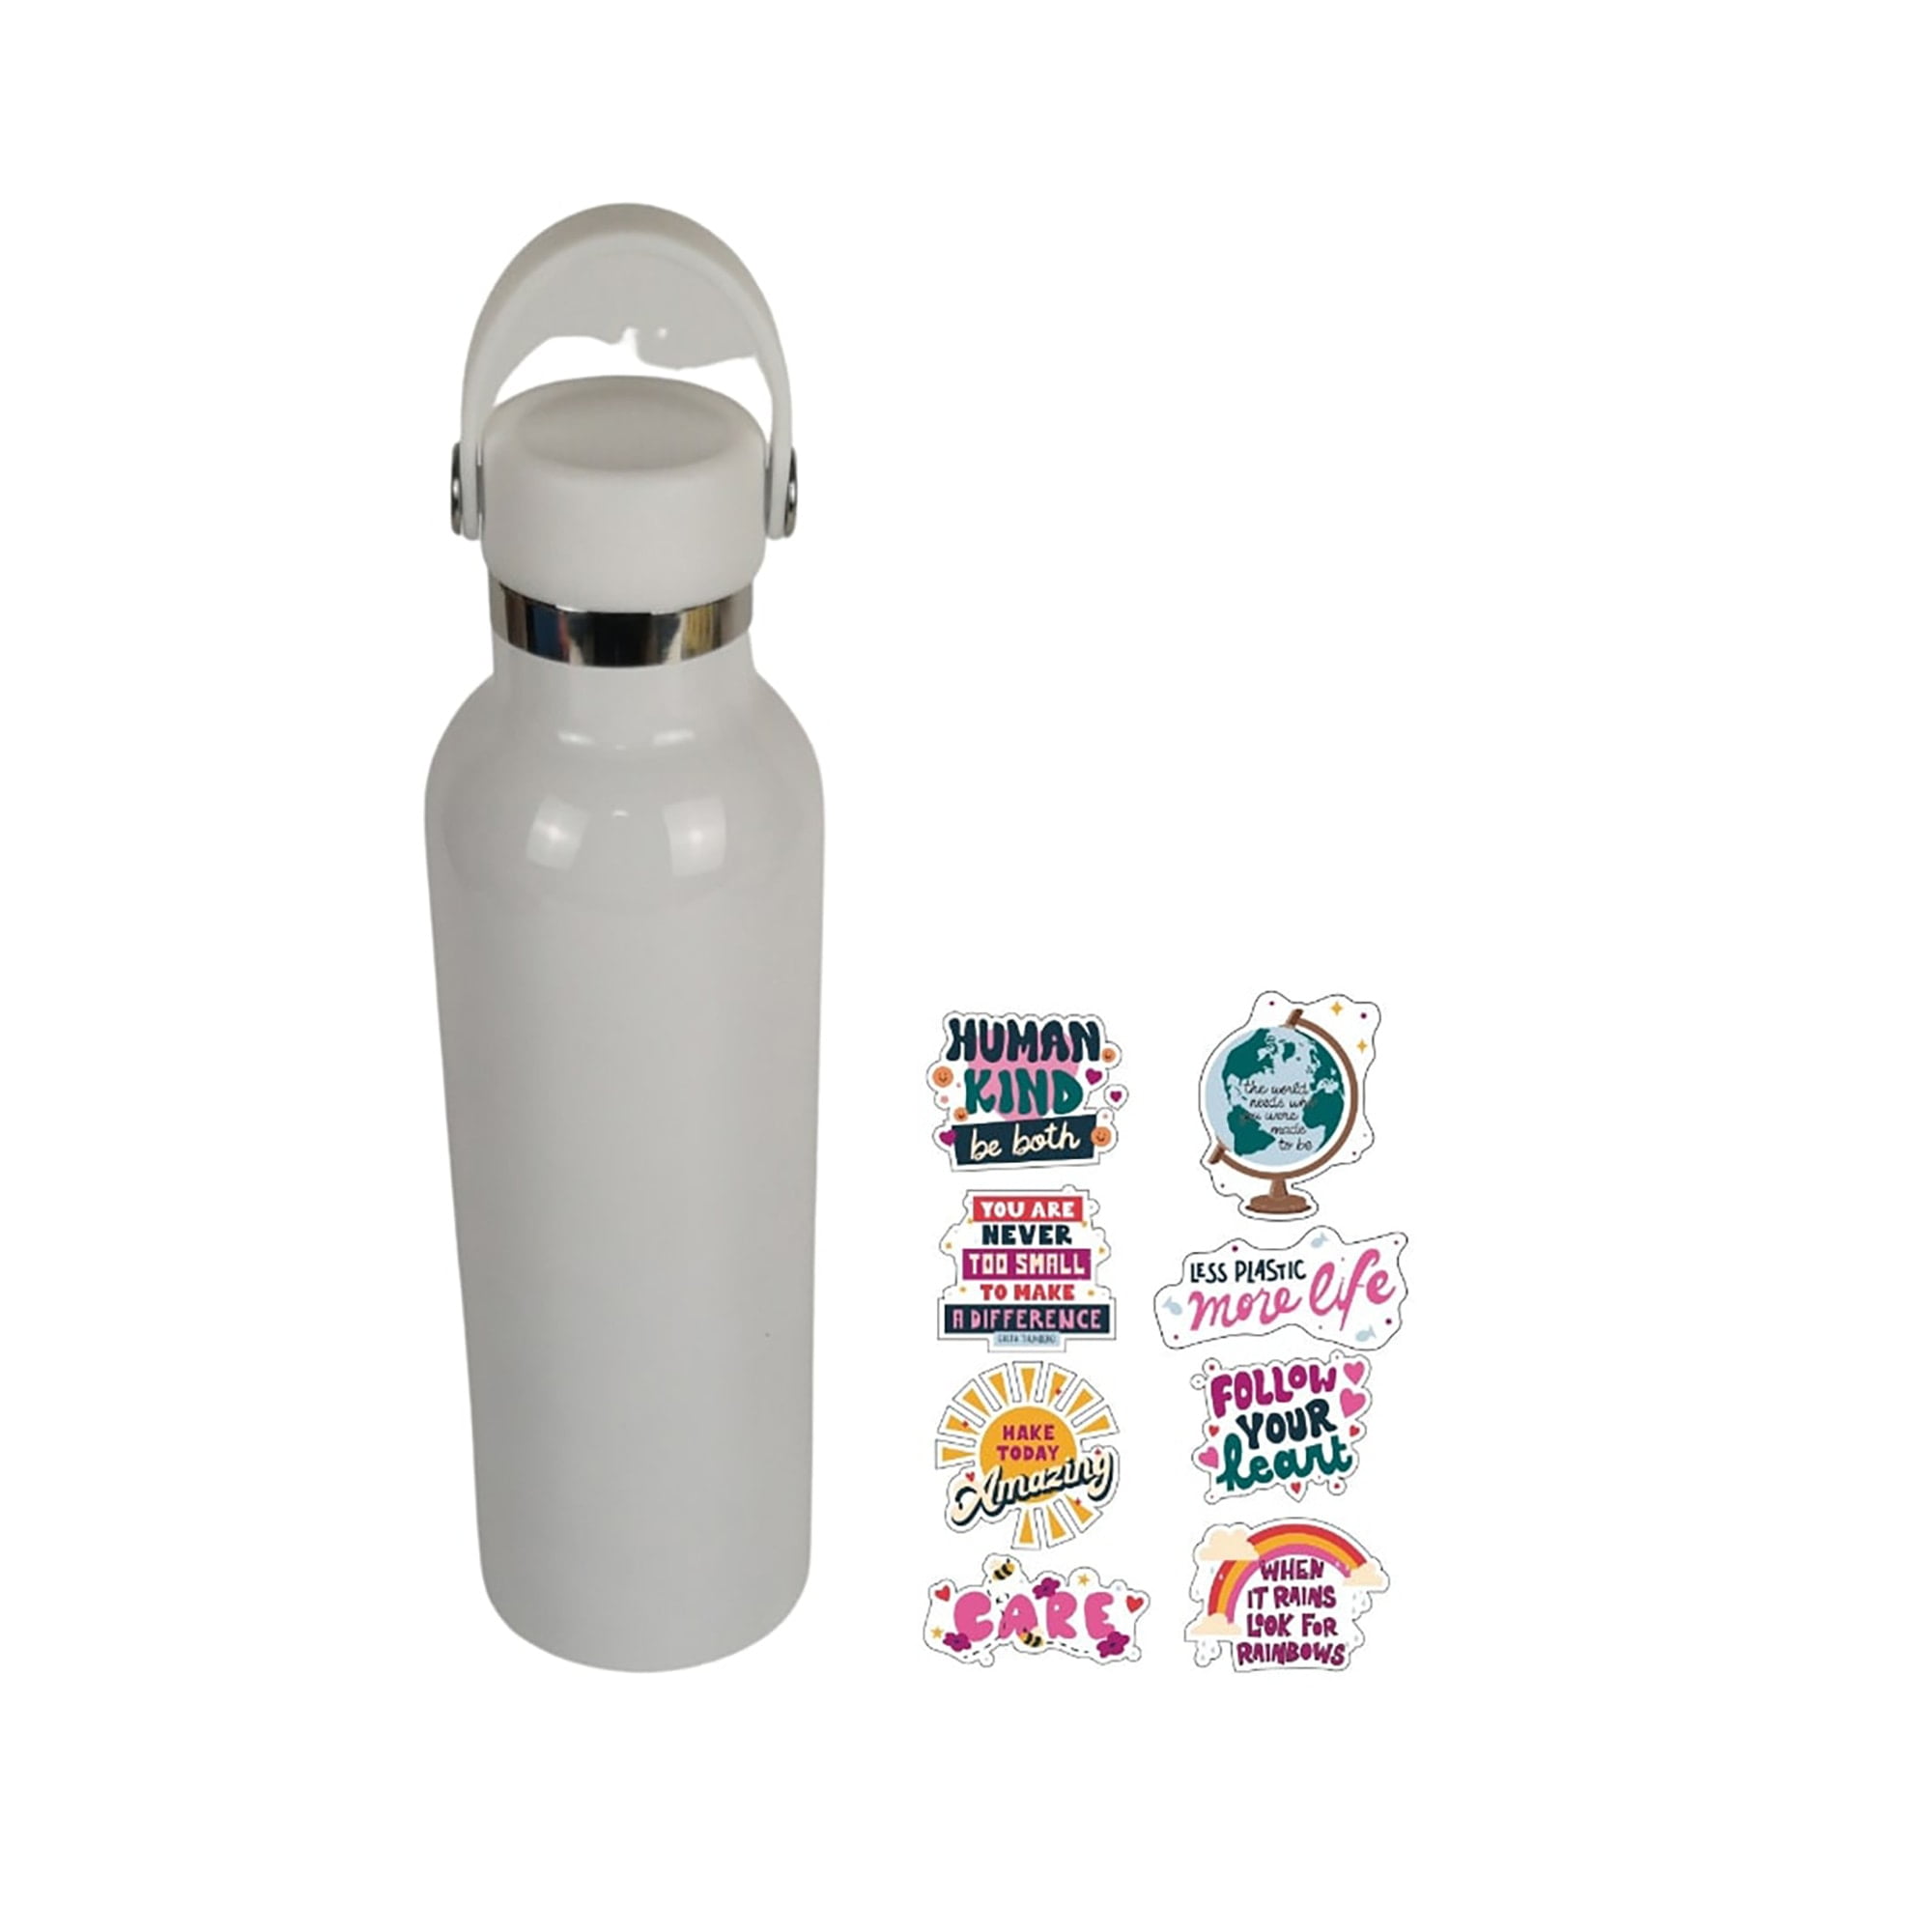  YOFUN Decorate Your Own Water Bottle with 11 Sheets of